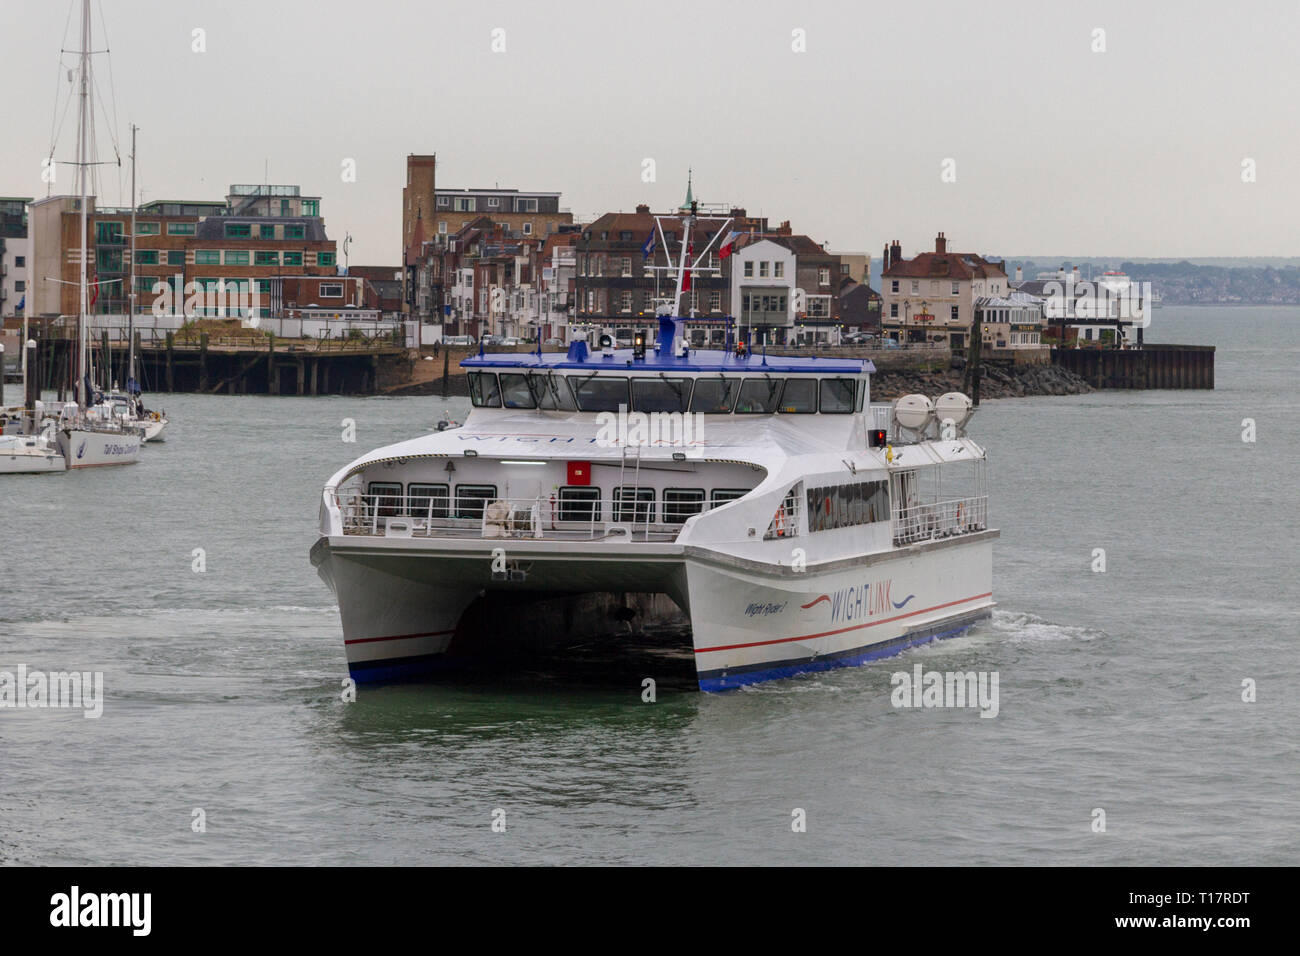 The Wight Ryder I, a Wightlink Isle of Wight ferry in Portsmouth Harbour, England, UK. Stock Photo